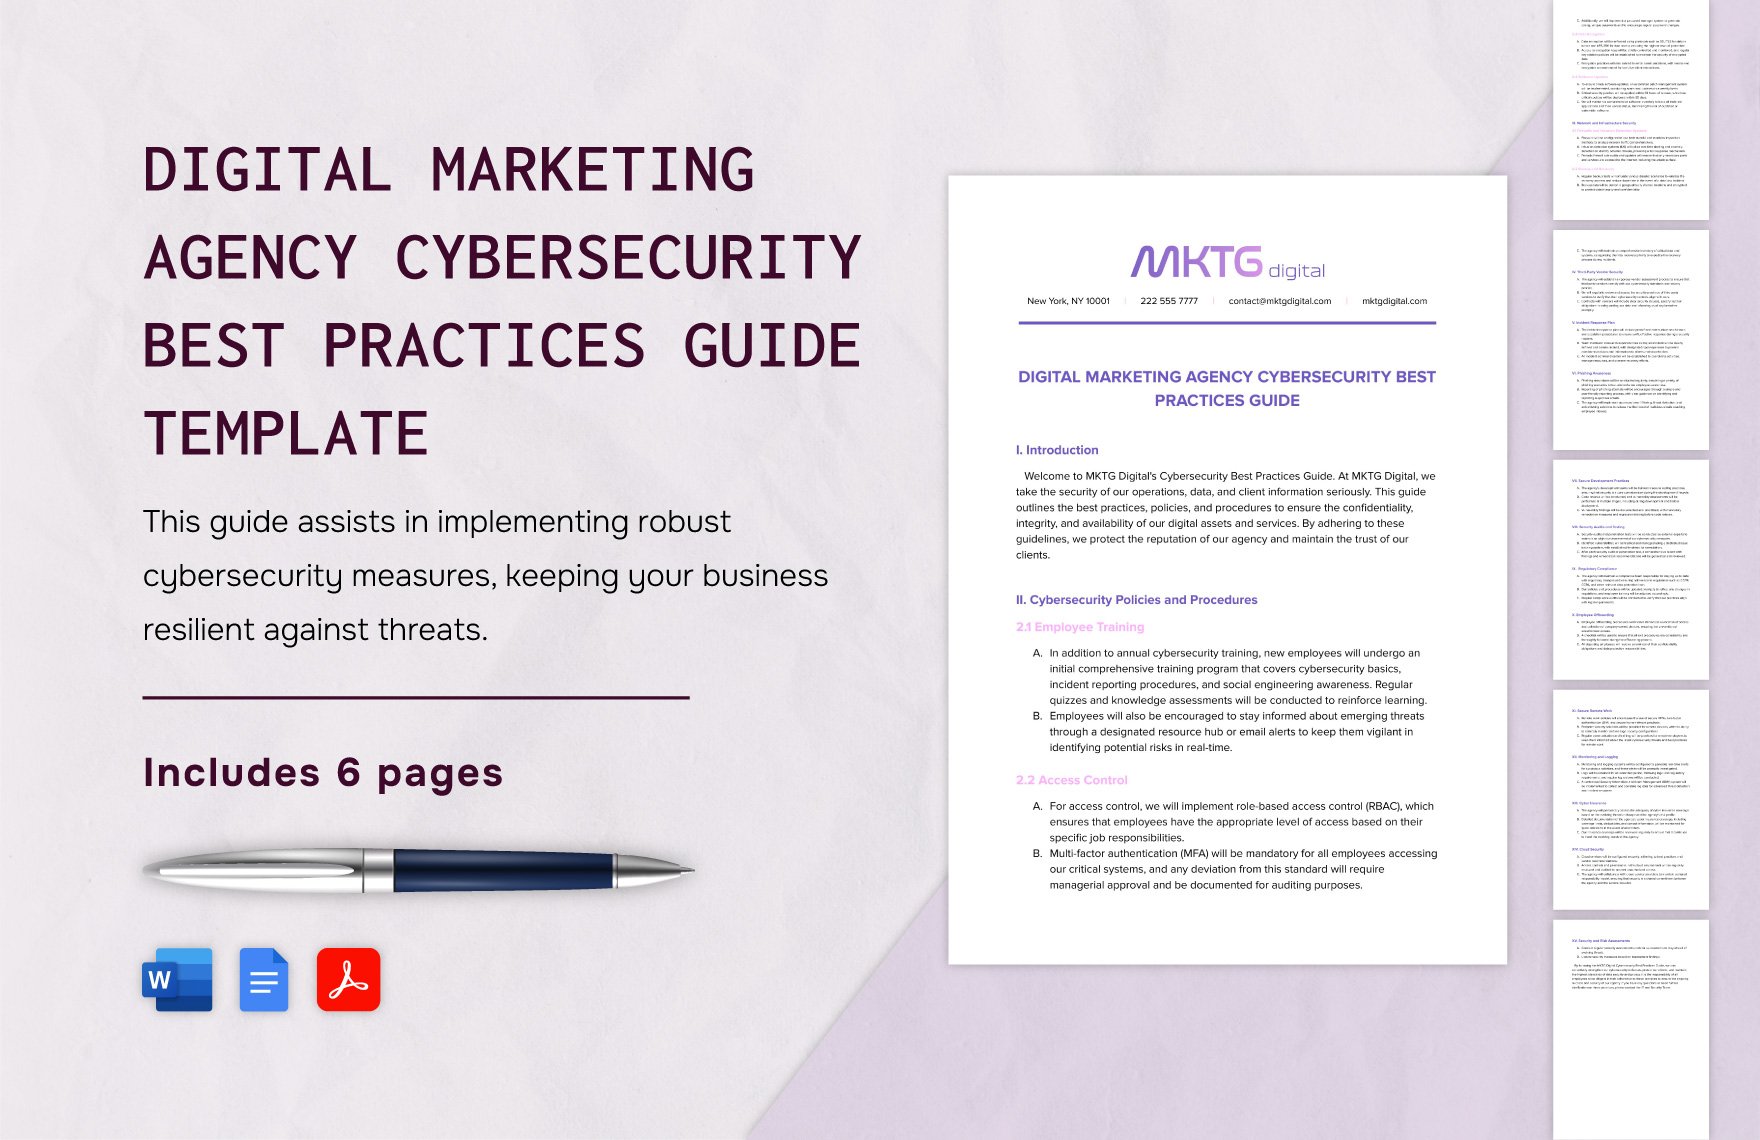 Digital Marketing Agency Cybersecurity Best Practices Guide Template